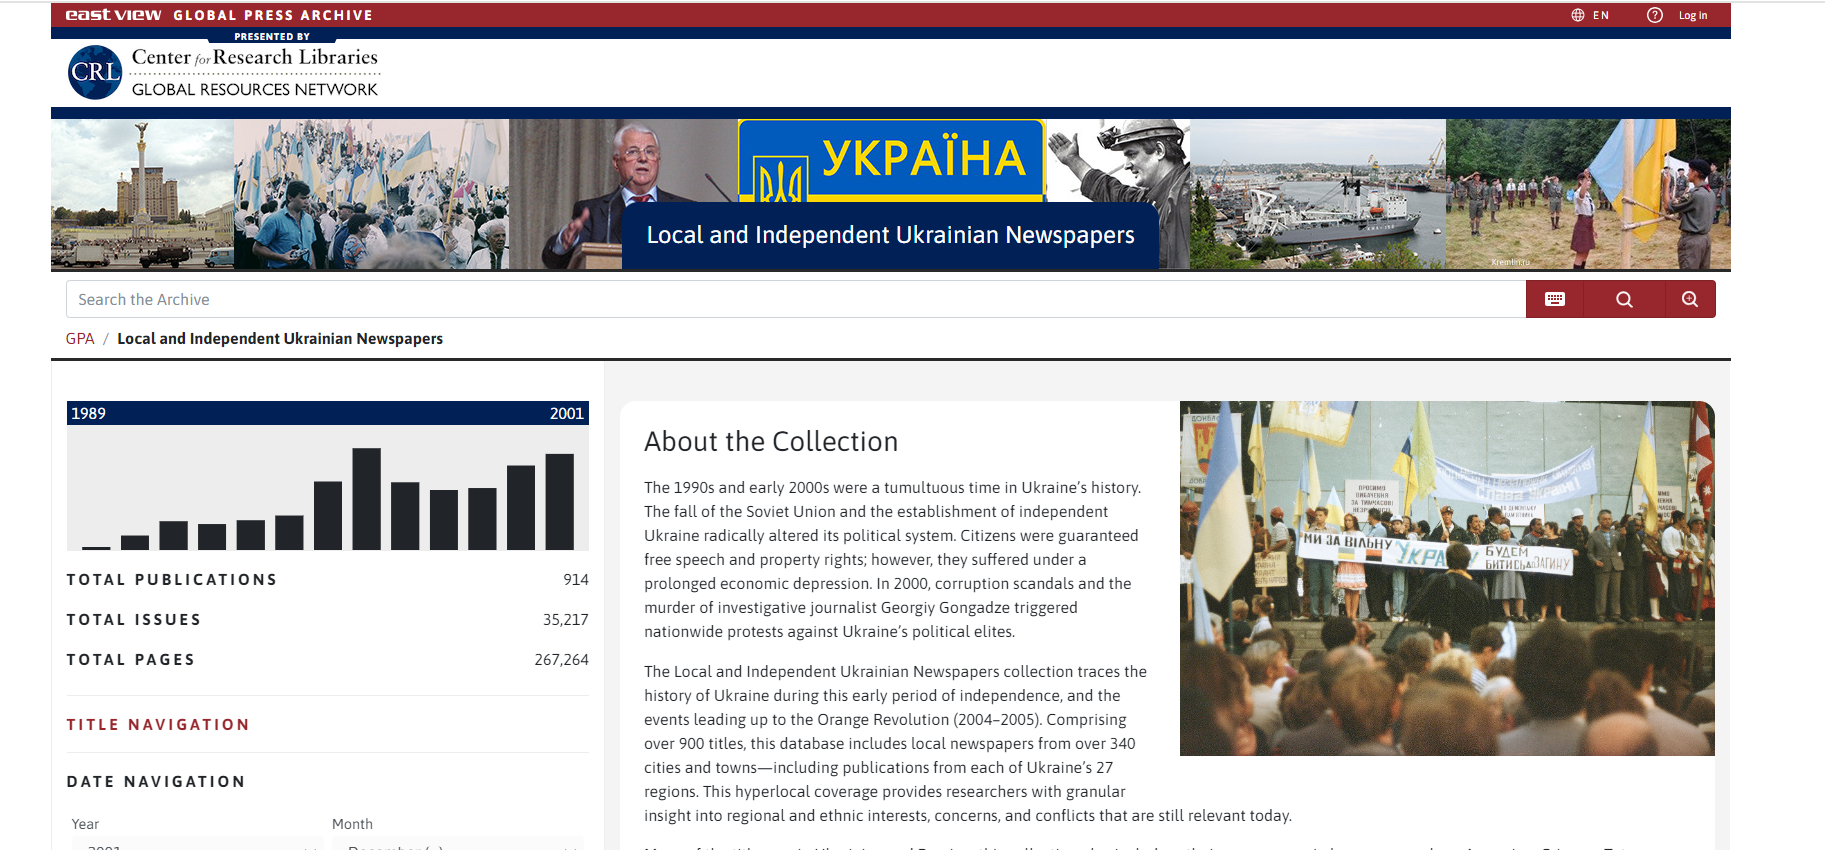 Here is the landing page of the The 1990s and early 2000s were a tumultuous time in Ukraine’s history. The fall of the Soviet Union and the establishment of independent Ukraine radically altered its political system. Citizens were guaranteed free speech and property rights; however, they suffered under a prolonged economic depression. In 2000, corruption scandals and the murder of investigative journalist Georgiy Gongadze triggered nationwide protests against Ukraine’s political elites.